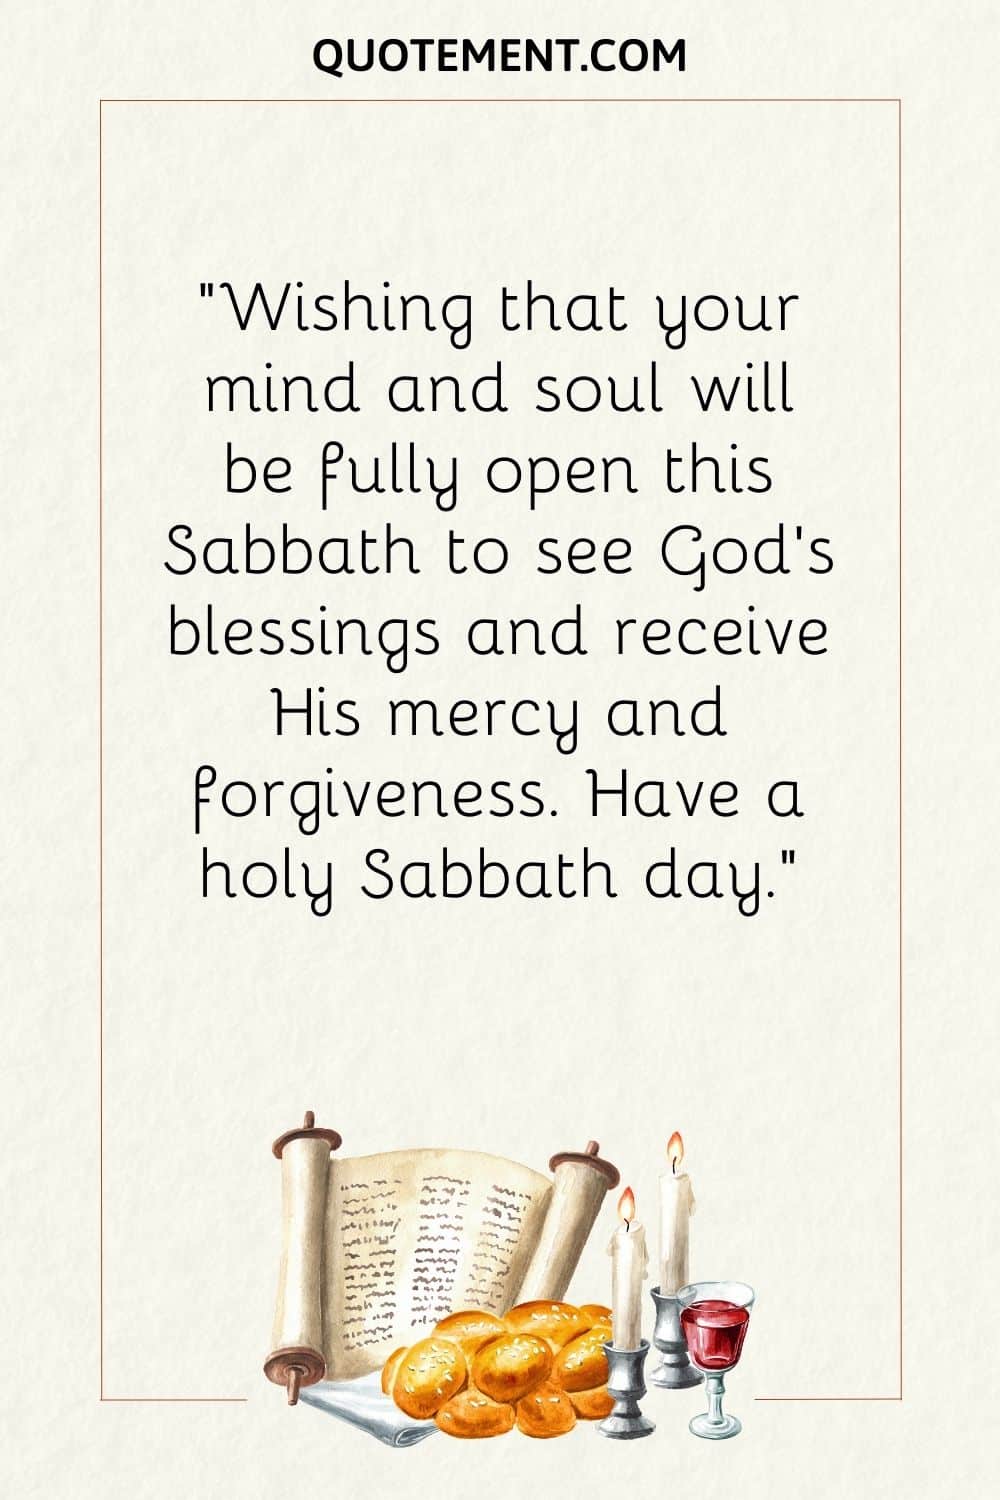 Wishing that your mind and soul will be fully open this Sabbath to see God’s blessings and receive His mercy and forgiveness